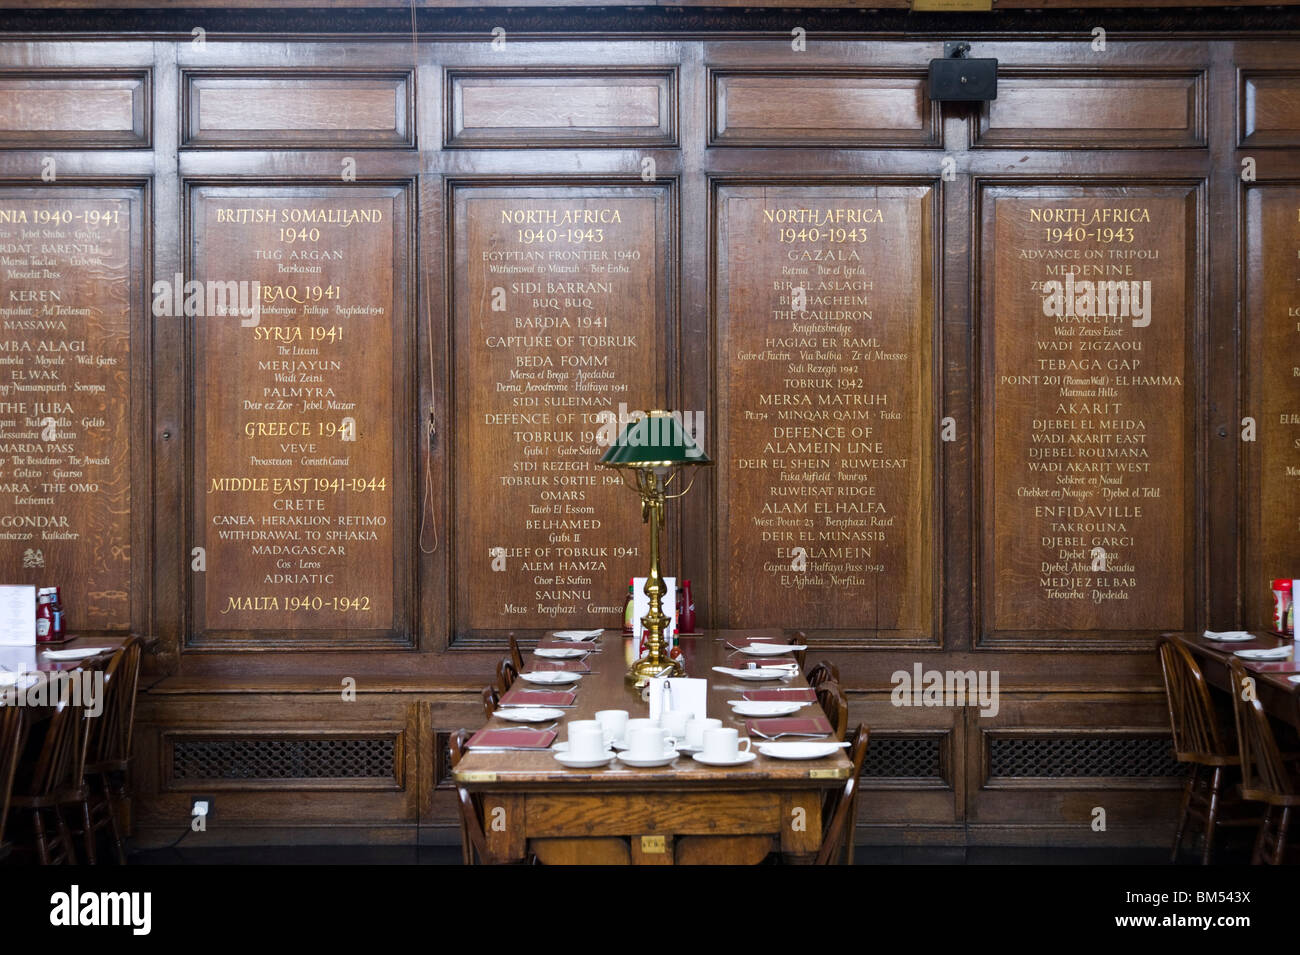 Wooden panel in the Great Hall of the Royal Hospital Chelsea showing dates of some World War II campaigns, London, England, UK Stock Photo